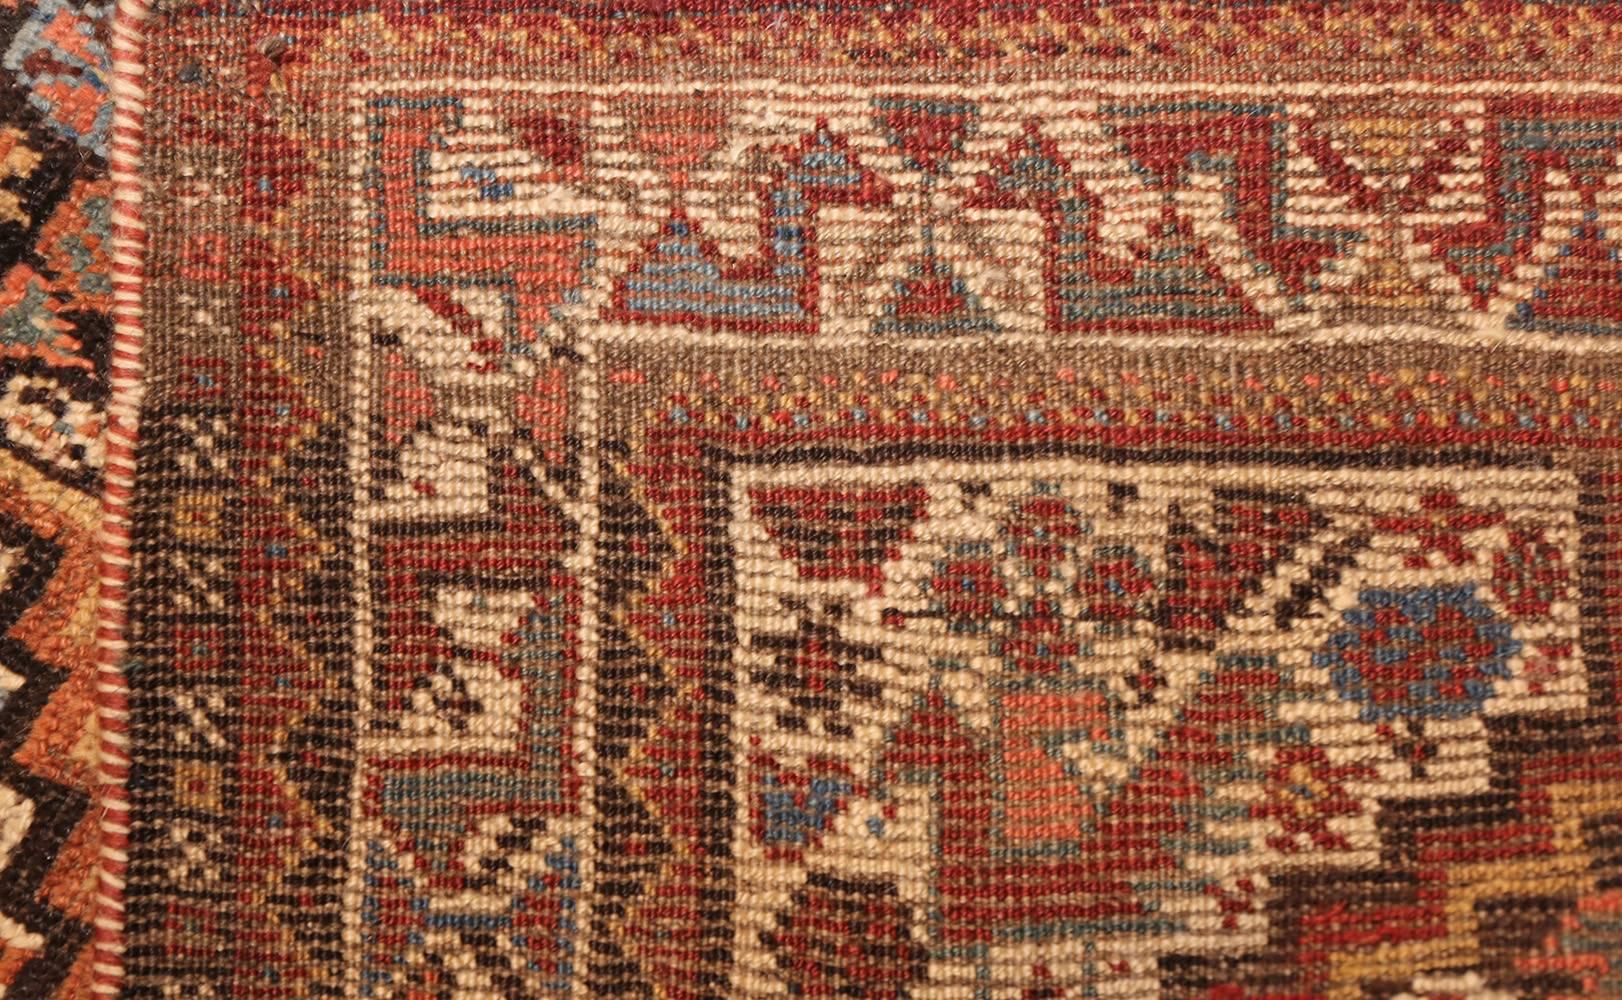 20th Century Antique Ghashgai Persian Rug. Size: 4 ft x 5 ft 2 in (1.22 m x 1.57 m)